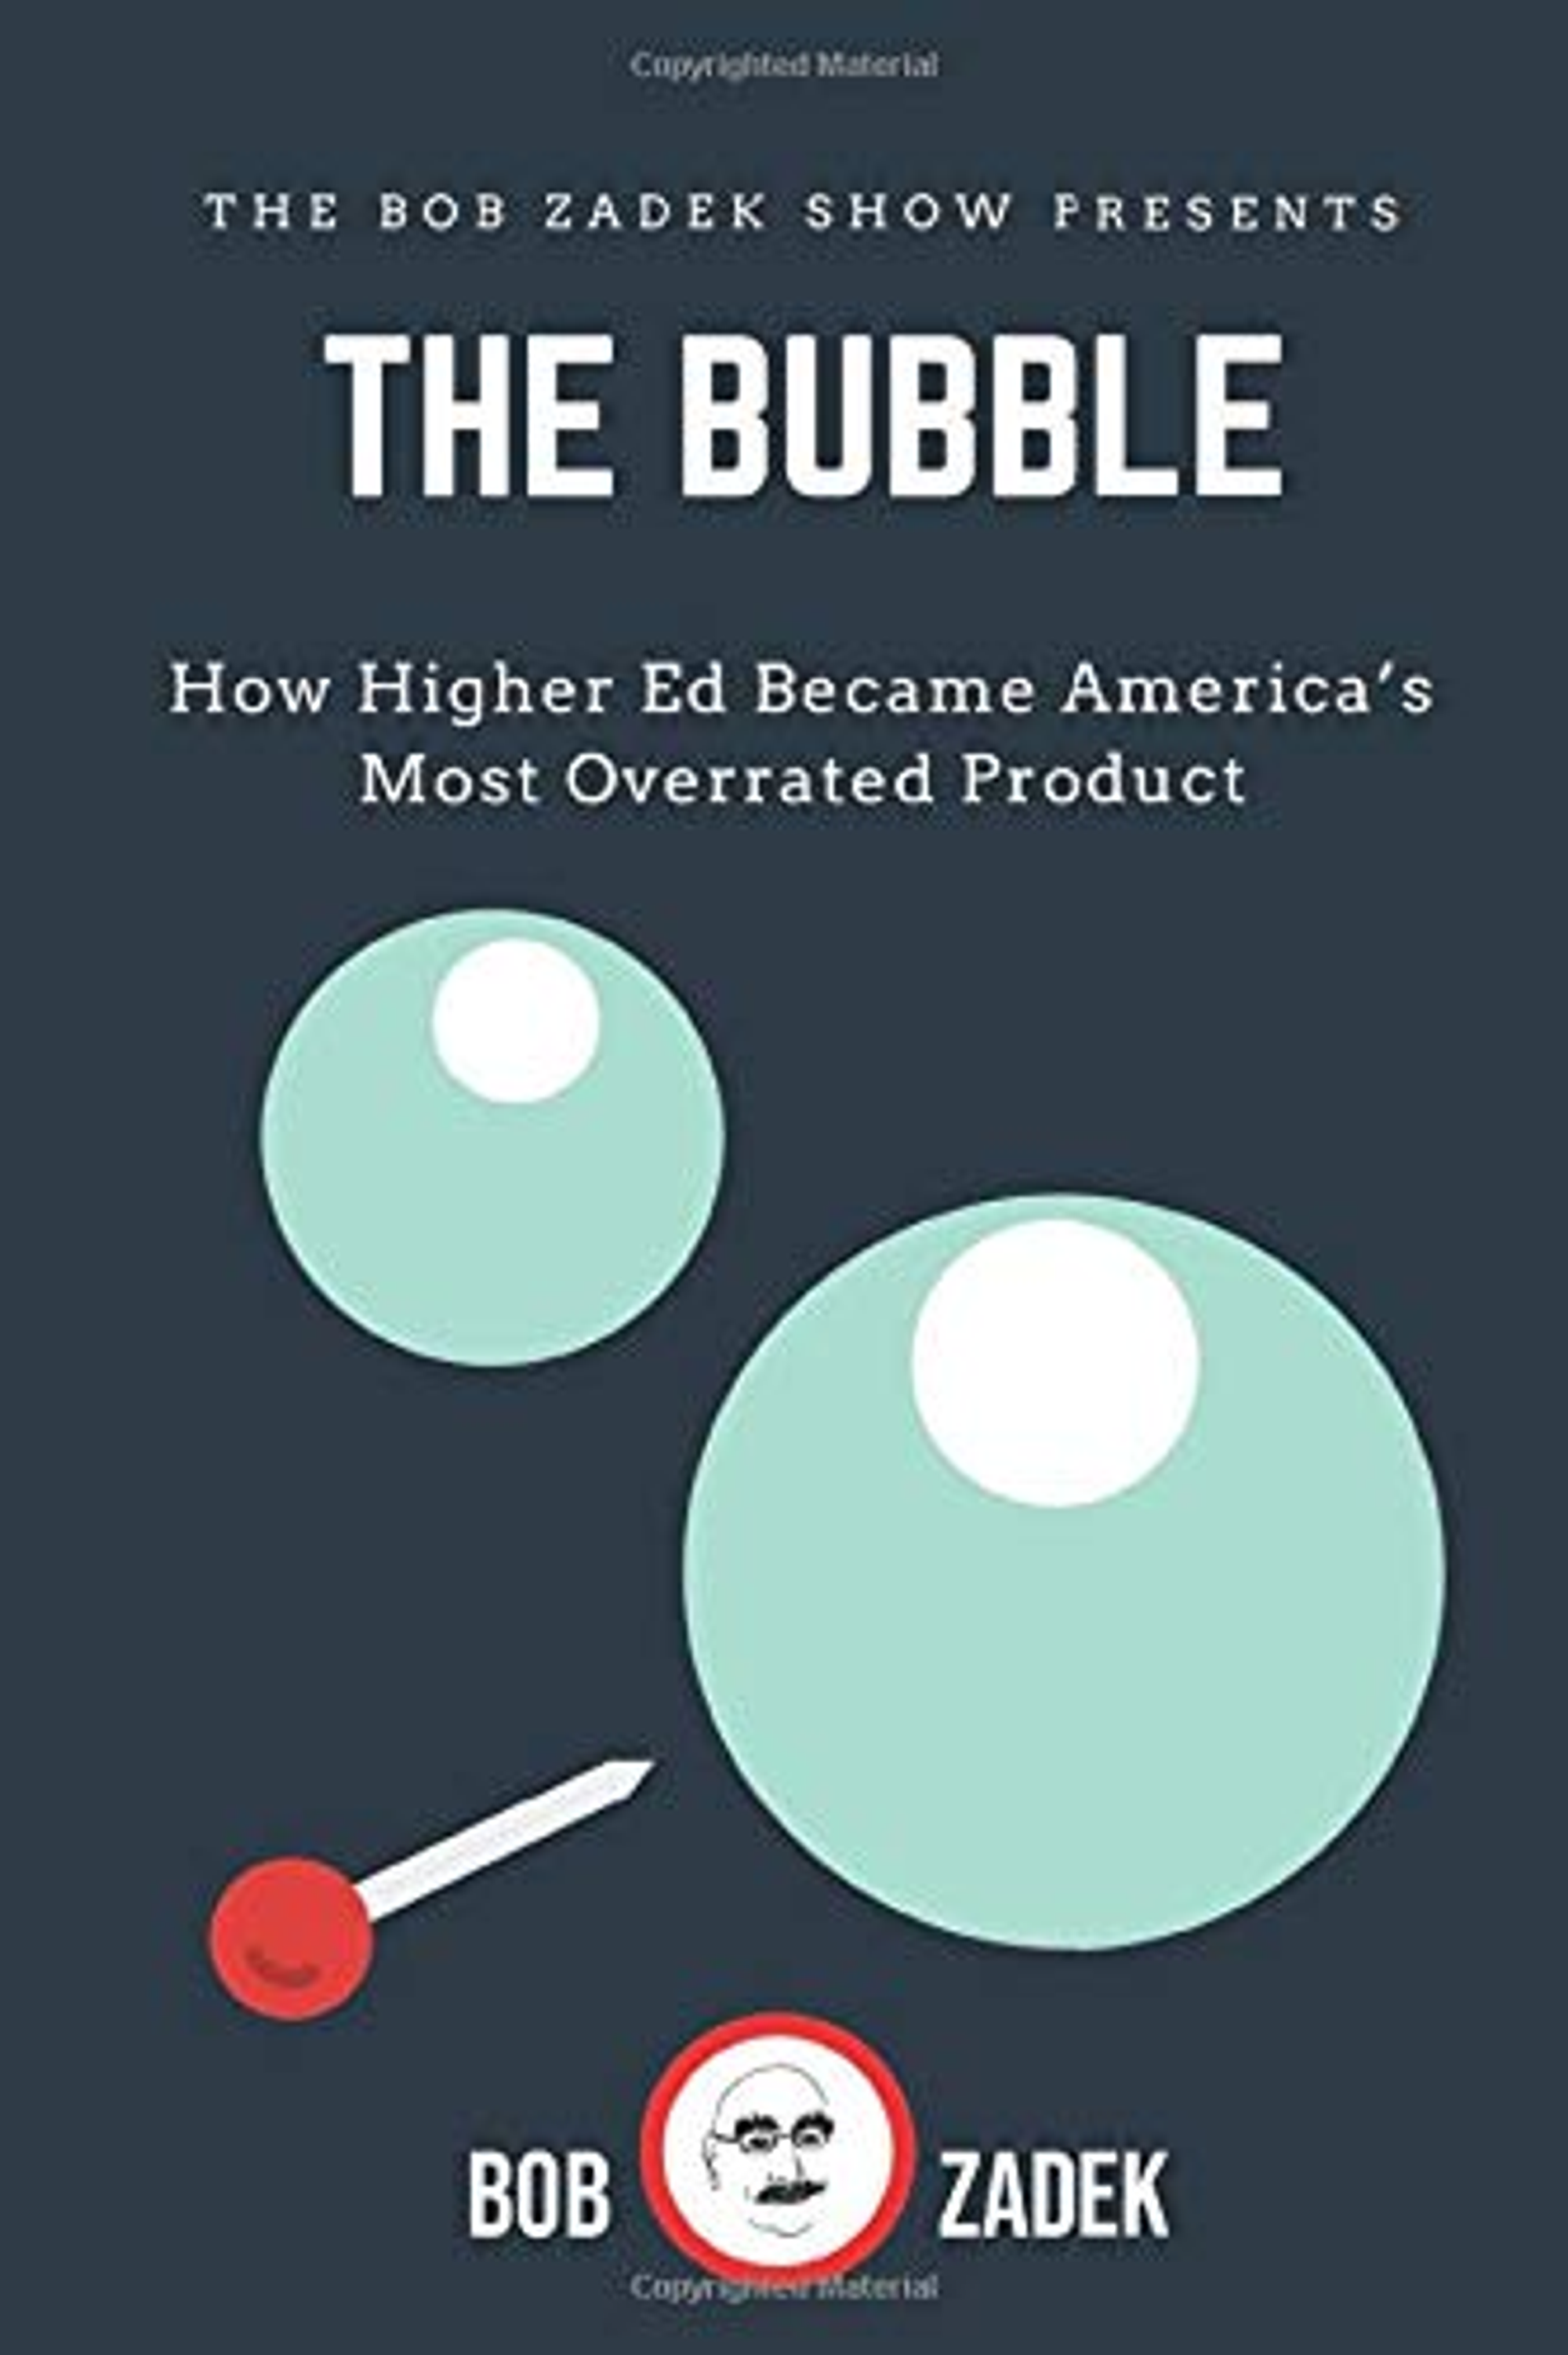 The Bubble: How Higher Education Abandoned its Mission and Became America’s Most Over-Rated Product